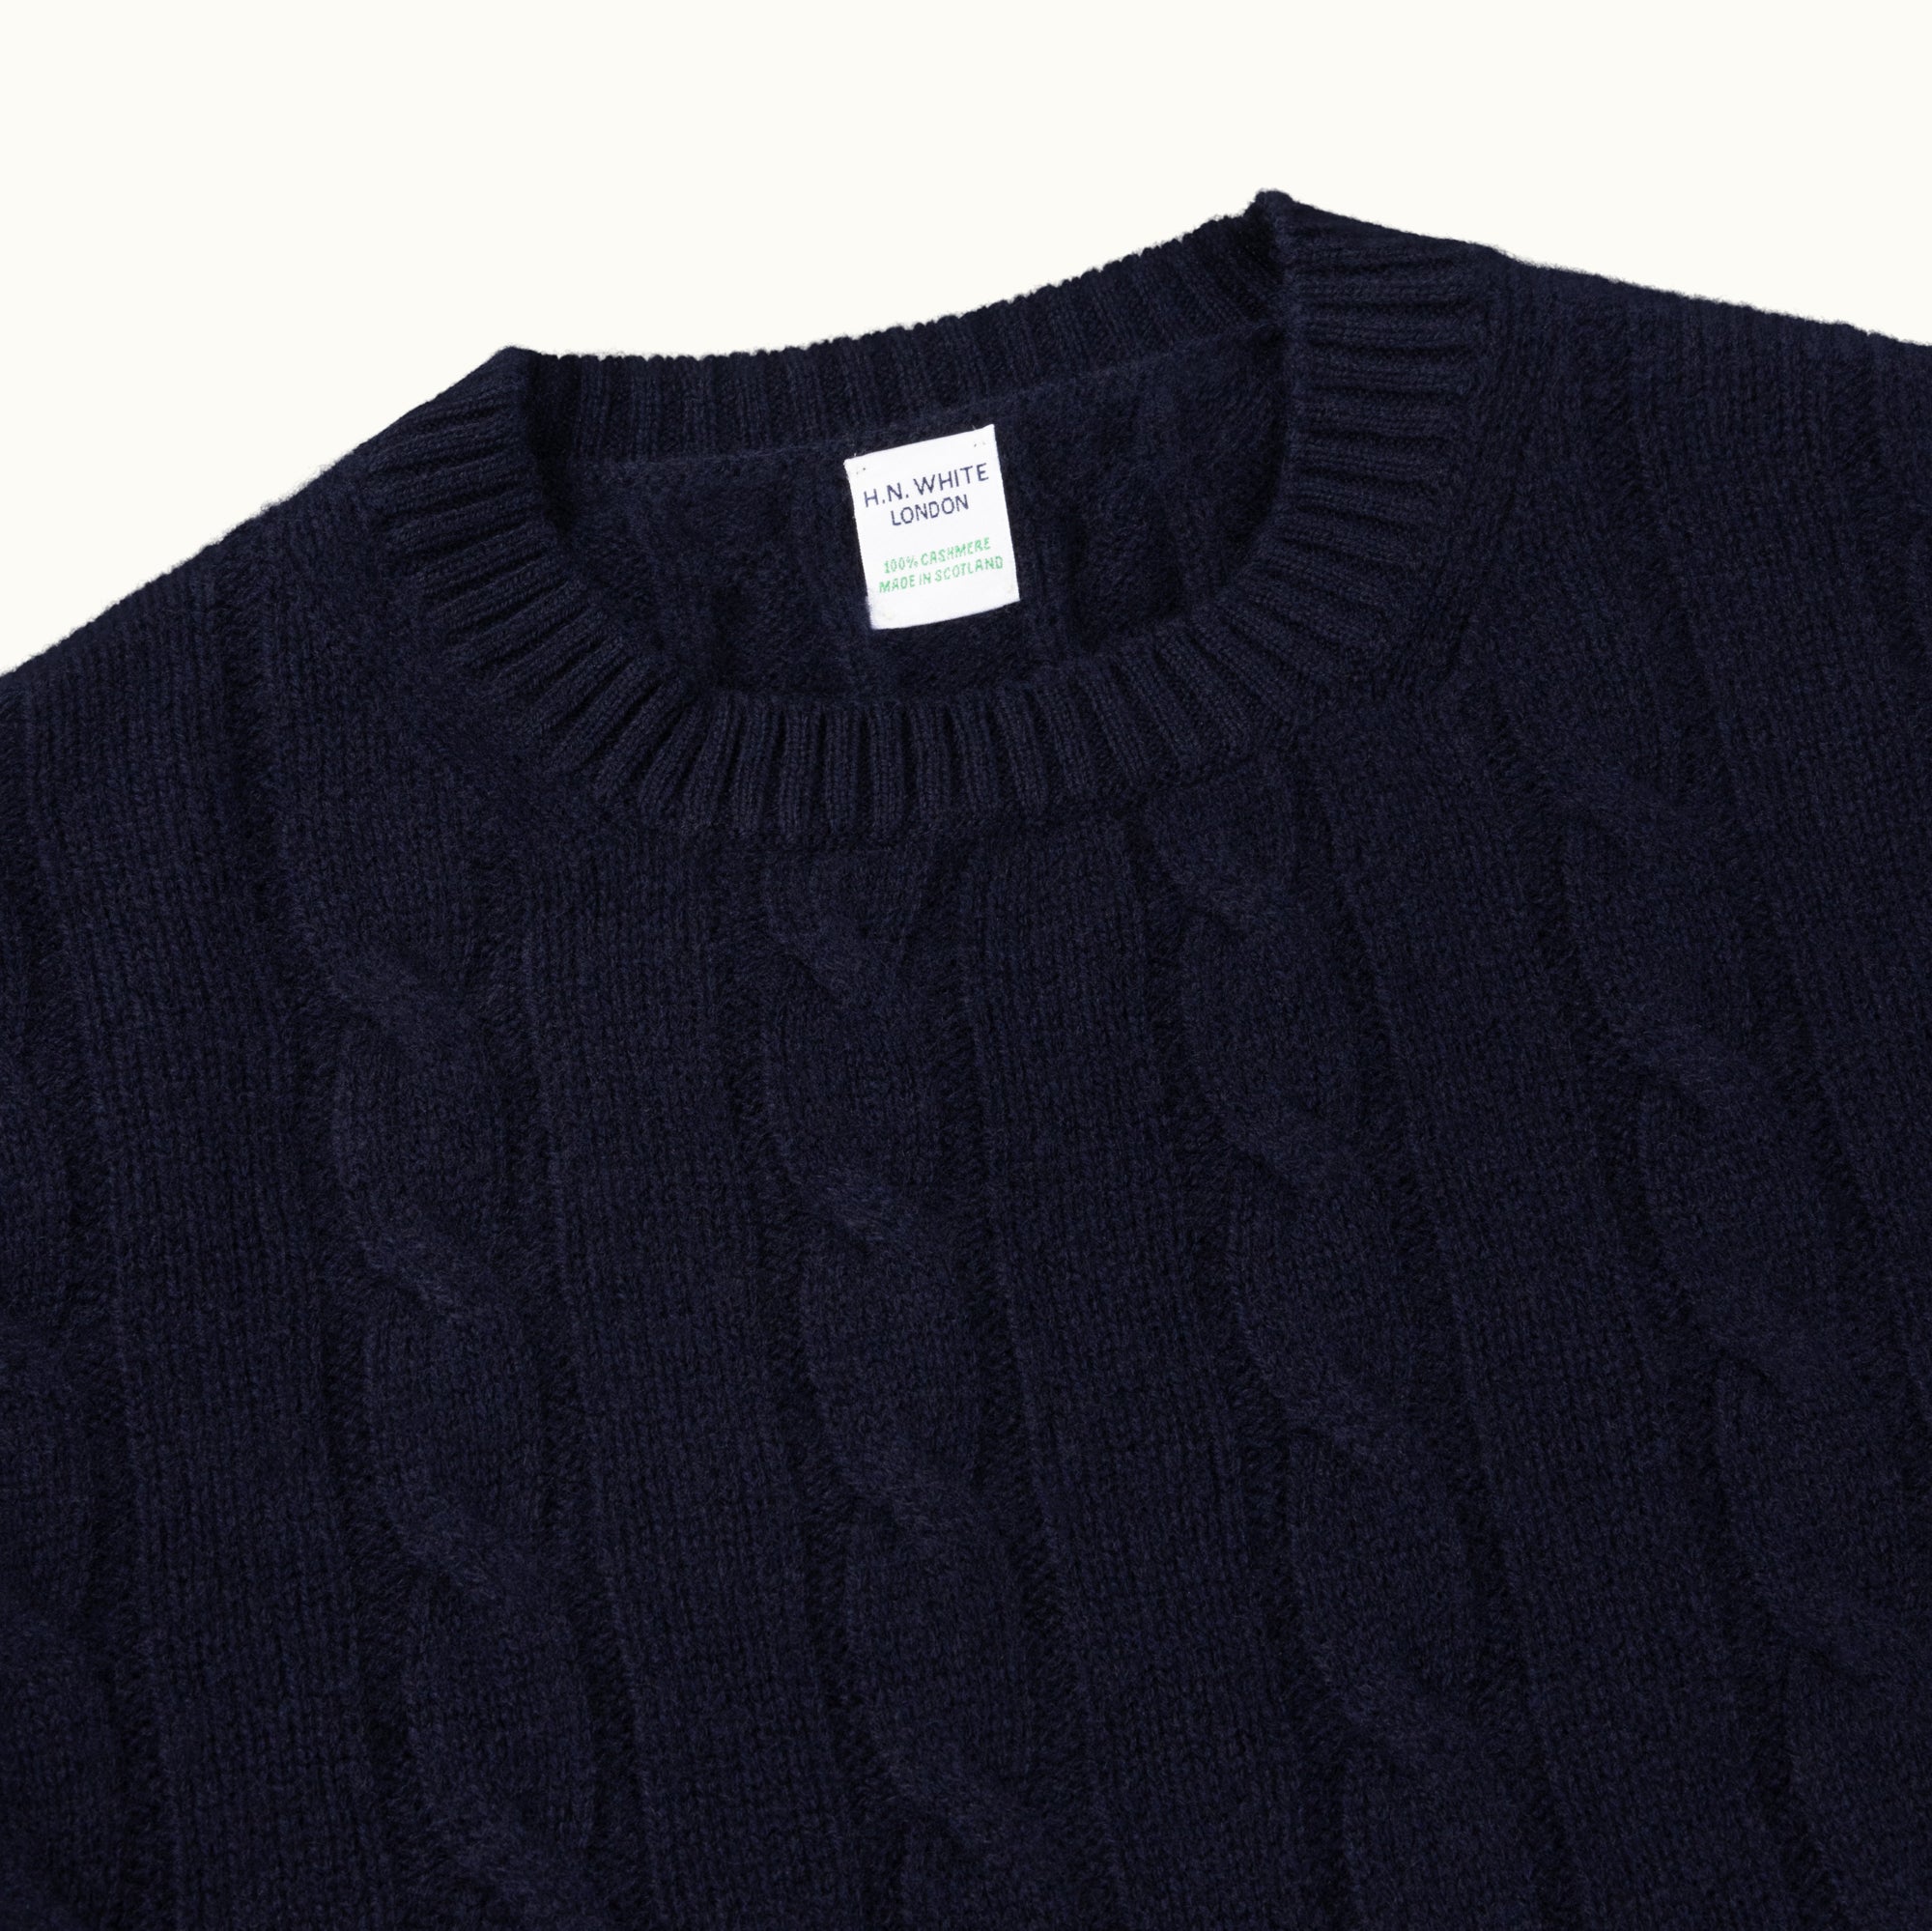 Navy Blue Cable Knit Cashmere Jumper